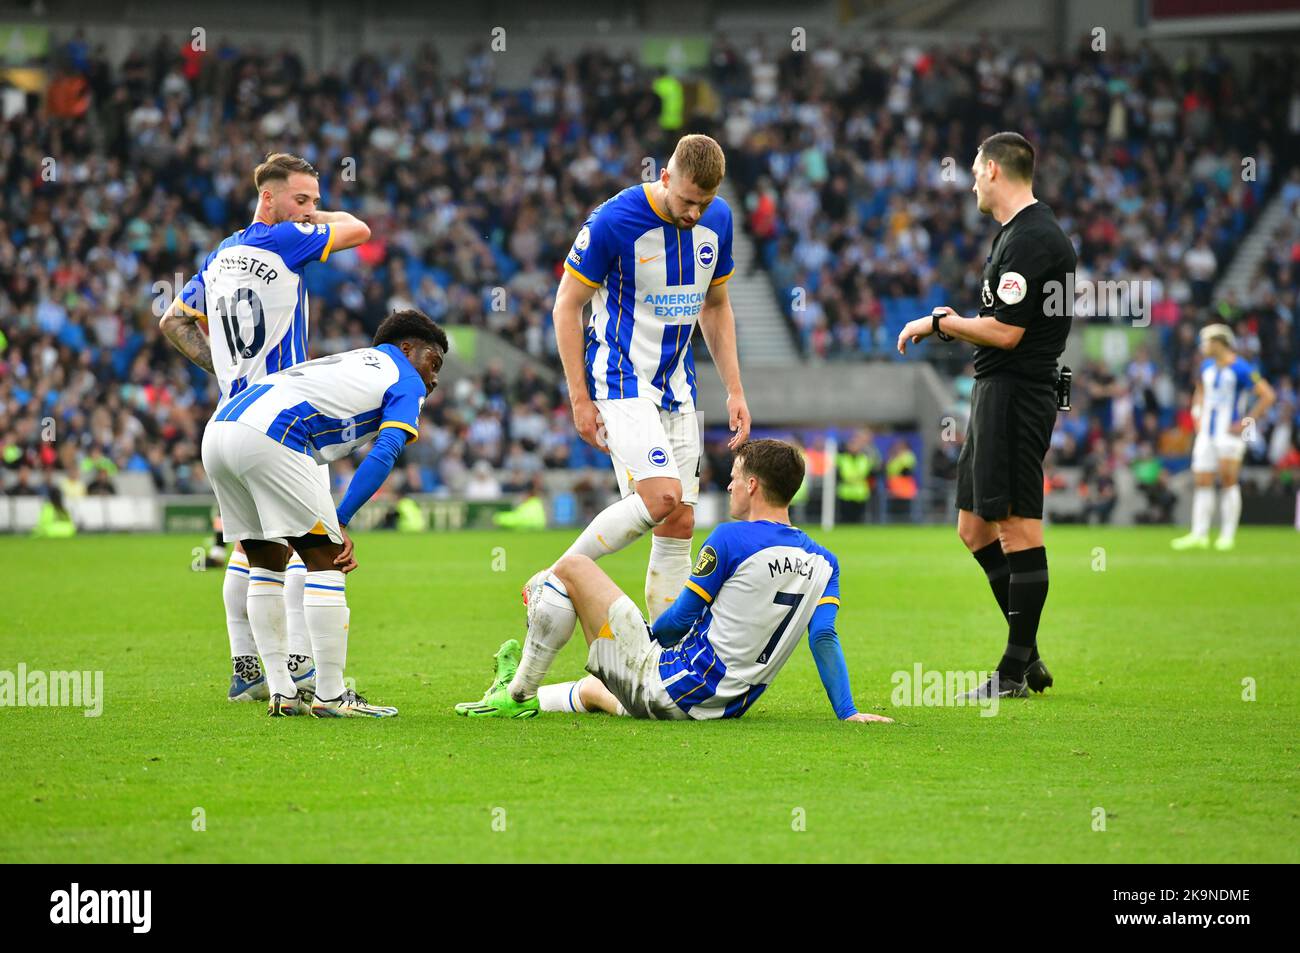 Brighton, UK. 29th Oct, 2022. Solly March of Brighton and Hove Albion goes to ground during the Premier League match between Brighton & Hove Albion and Chelsea at The Amex on October 29th 2022 in Brighton, England. (Photo by Jeff Mood/phcimages.com) Credit: PHC Images/Alamy Live News Stock Photo